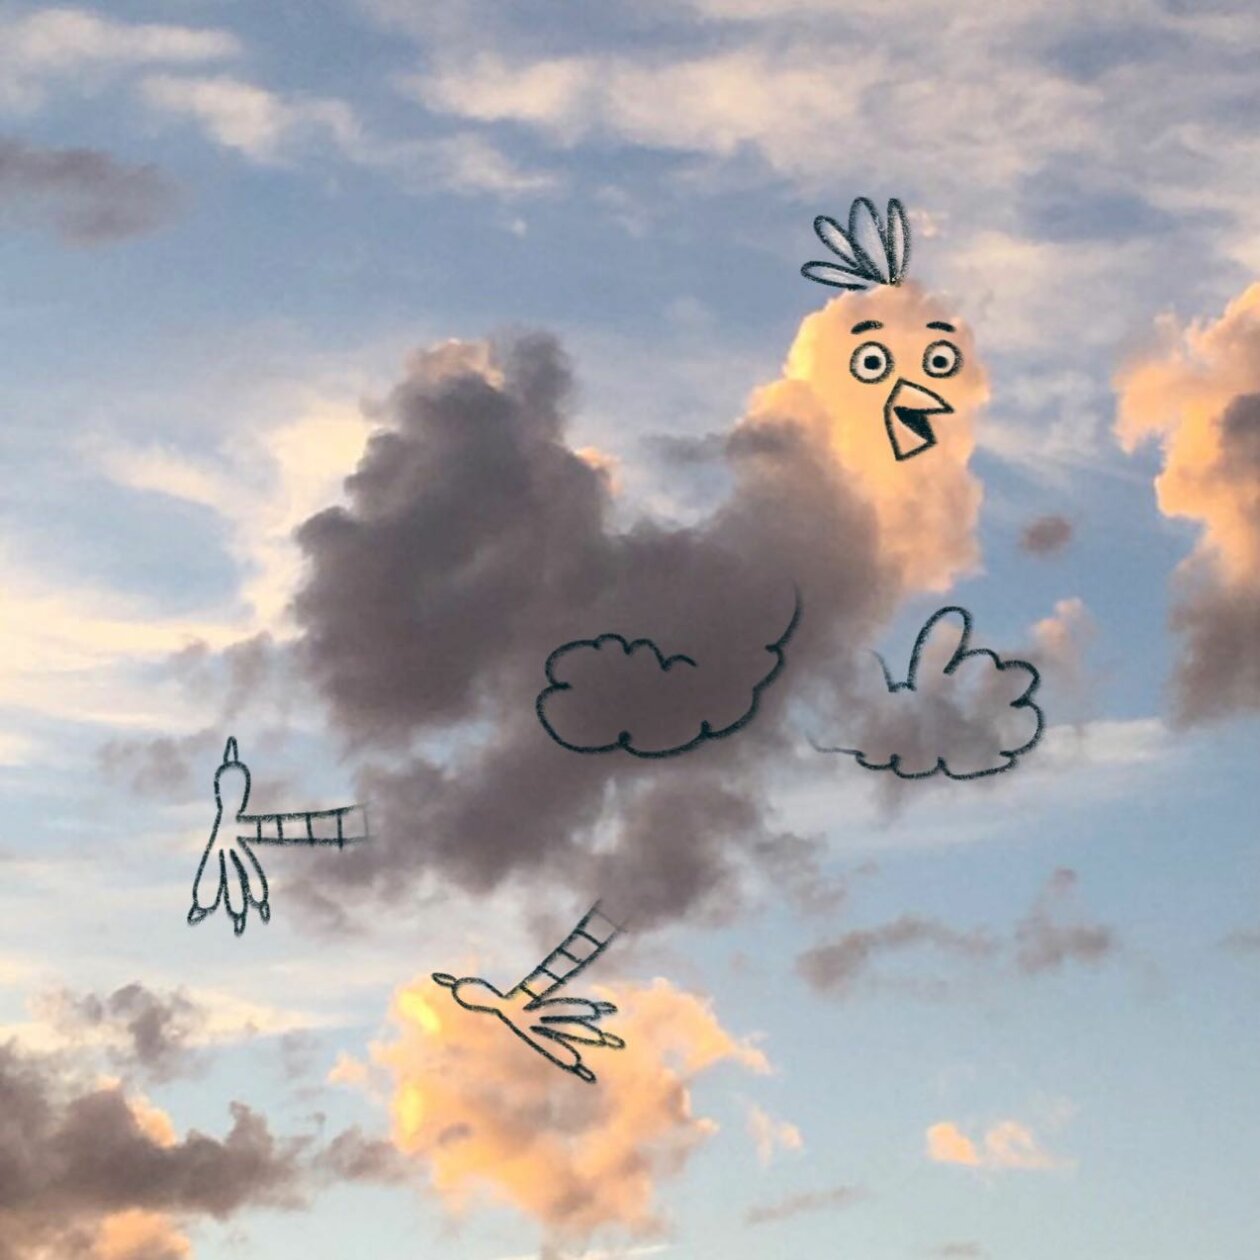 Clouds Turned Into Amusing Characters By Chris Judge (17)